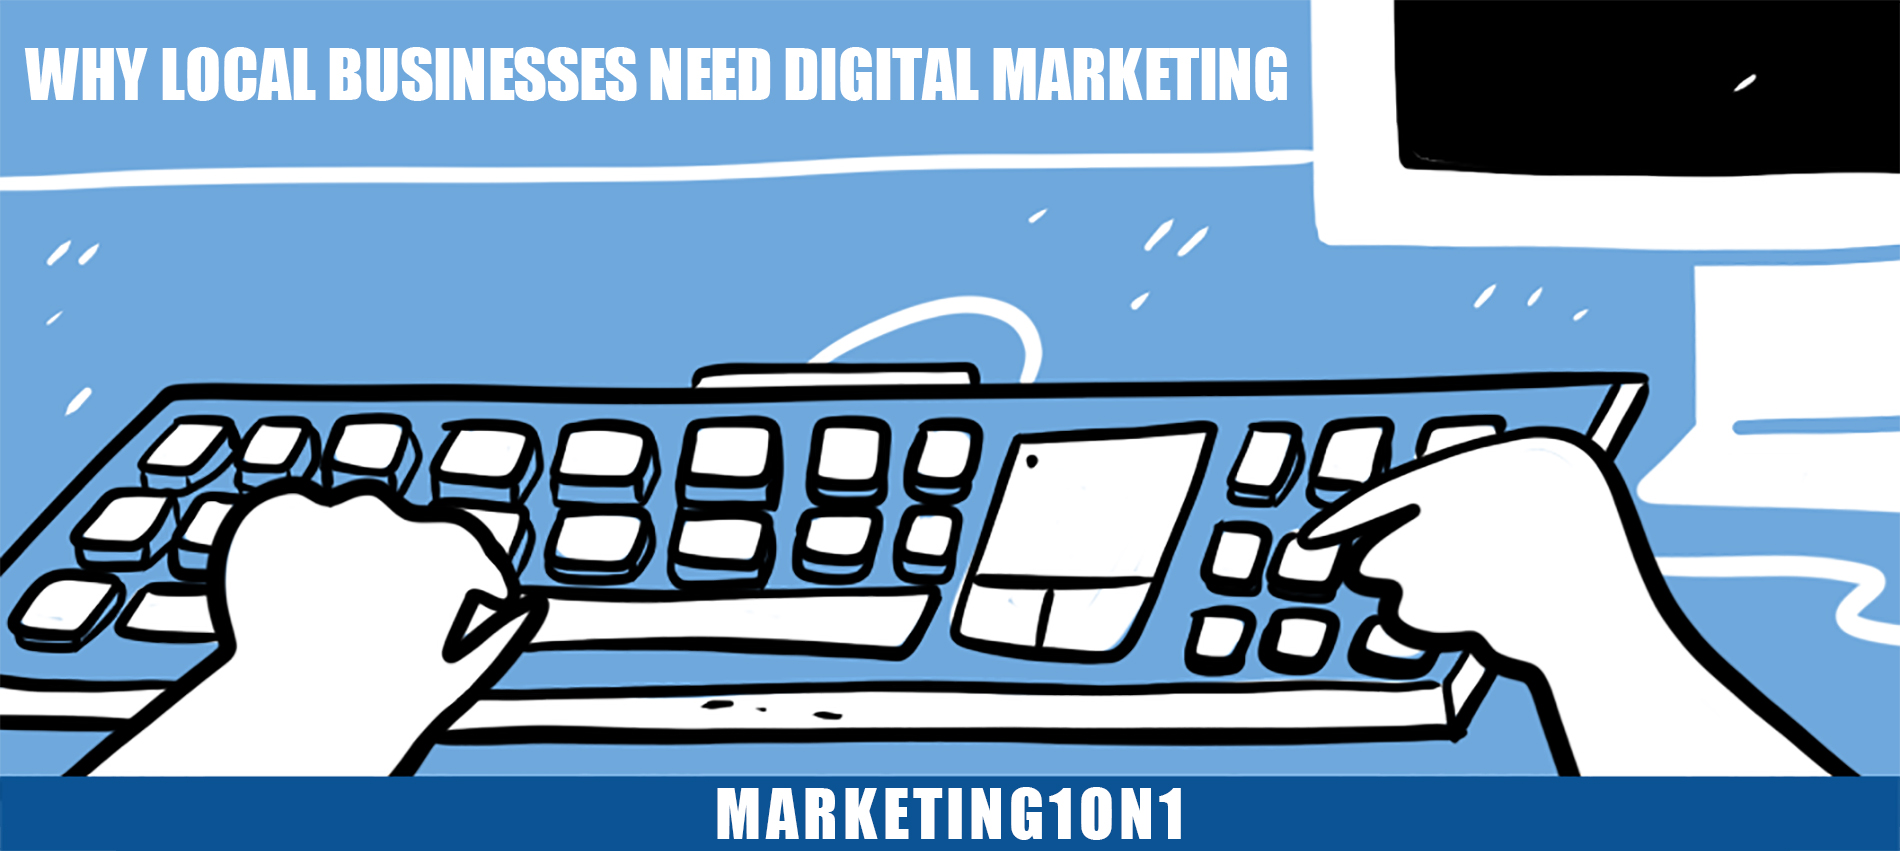 Why local businesses need digital marketing?